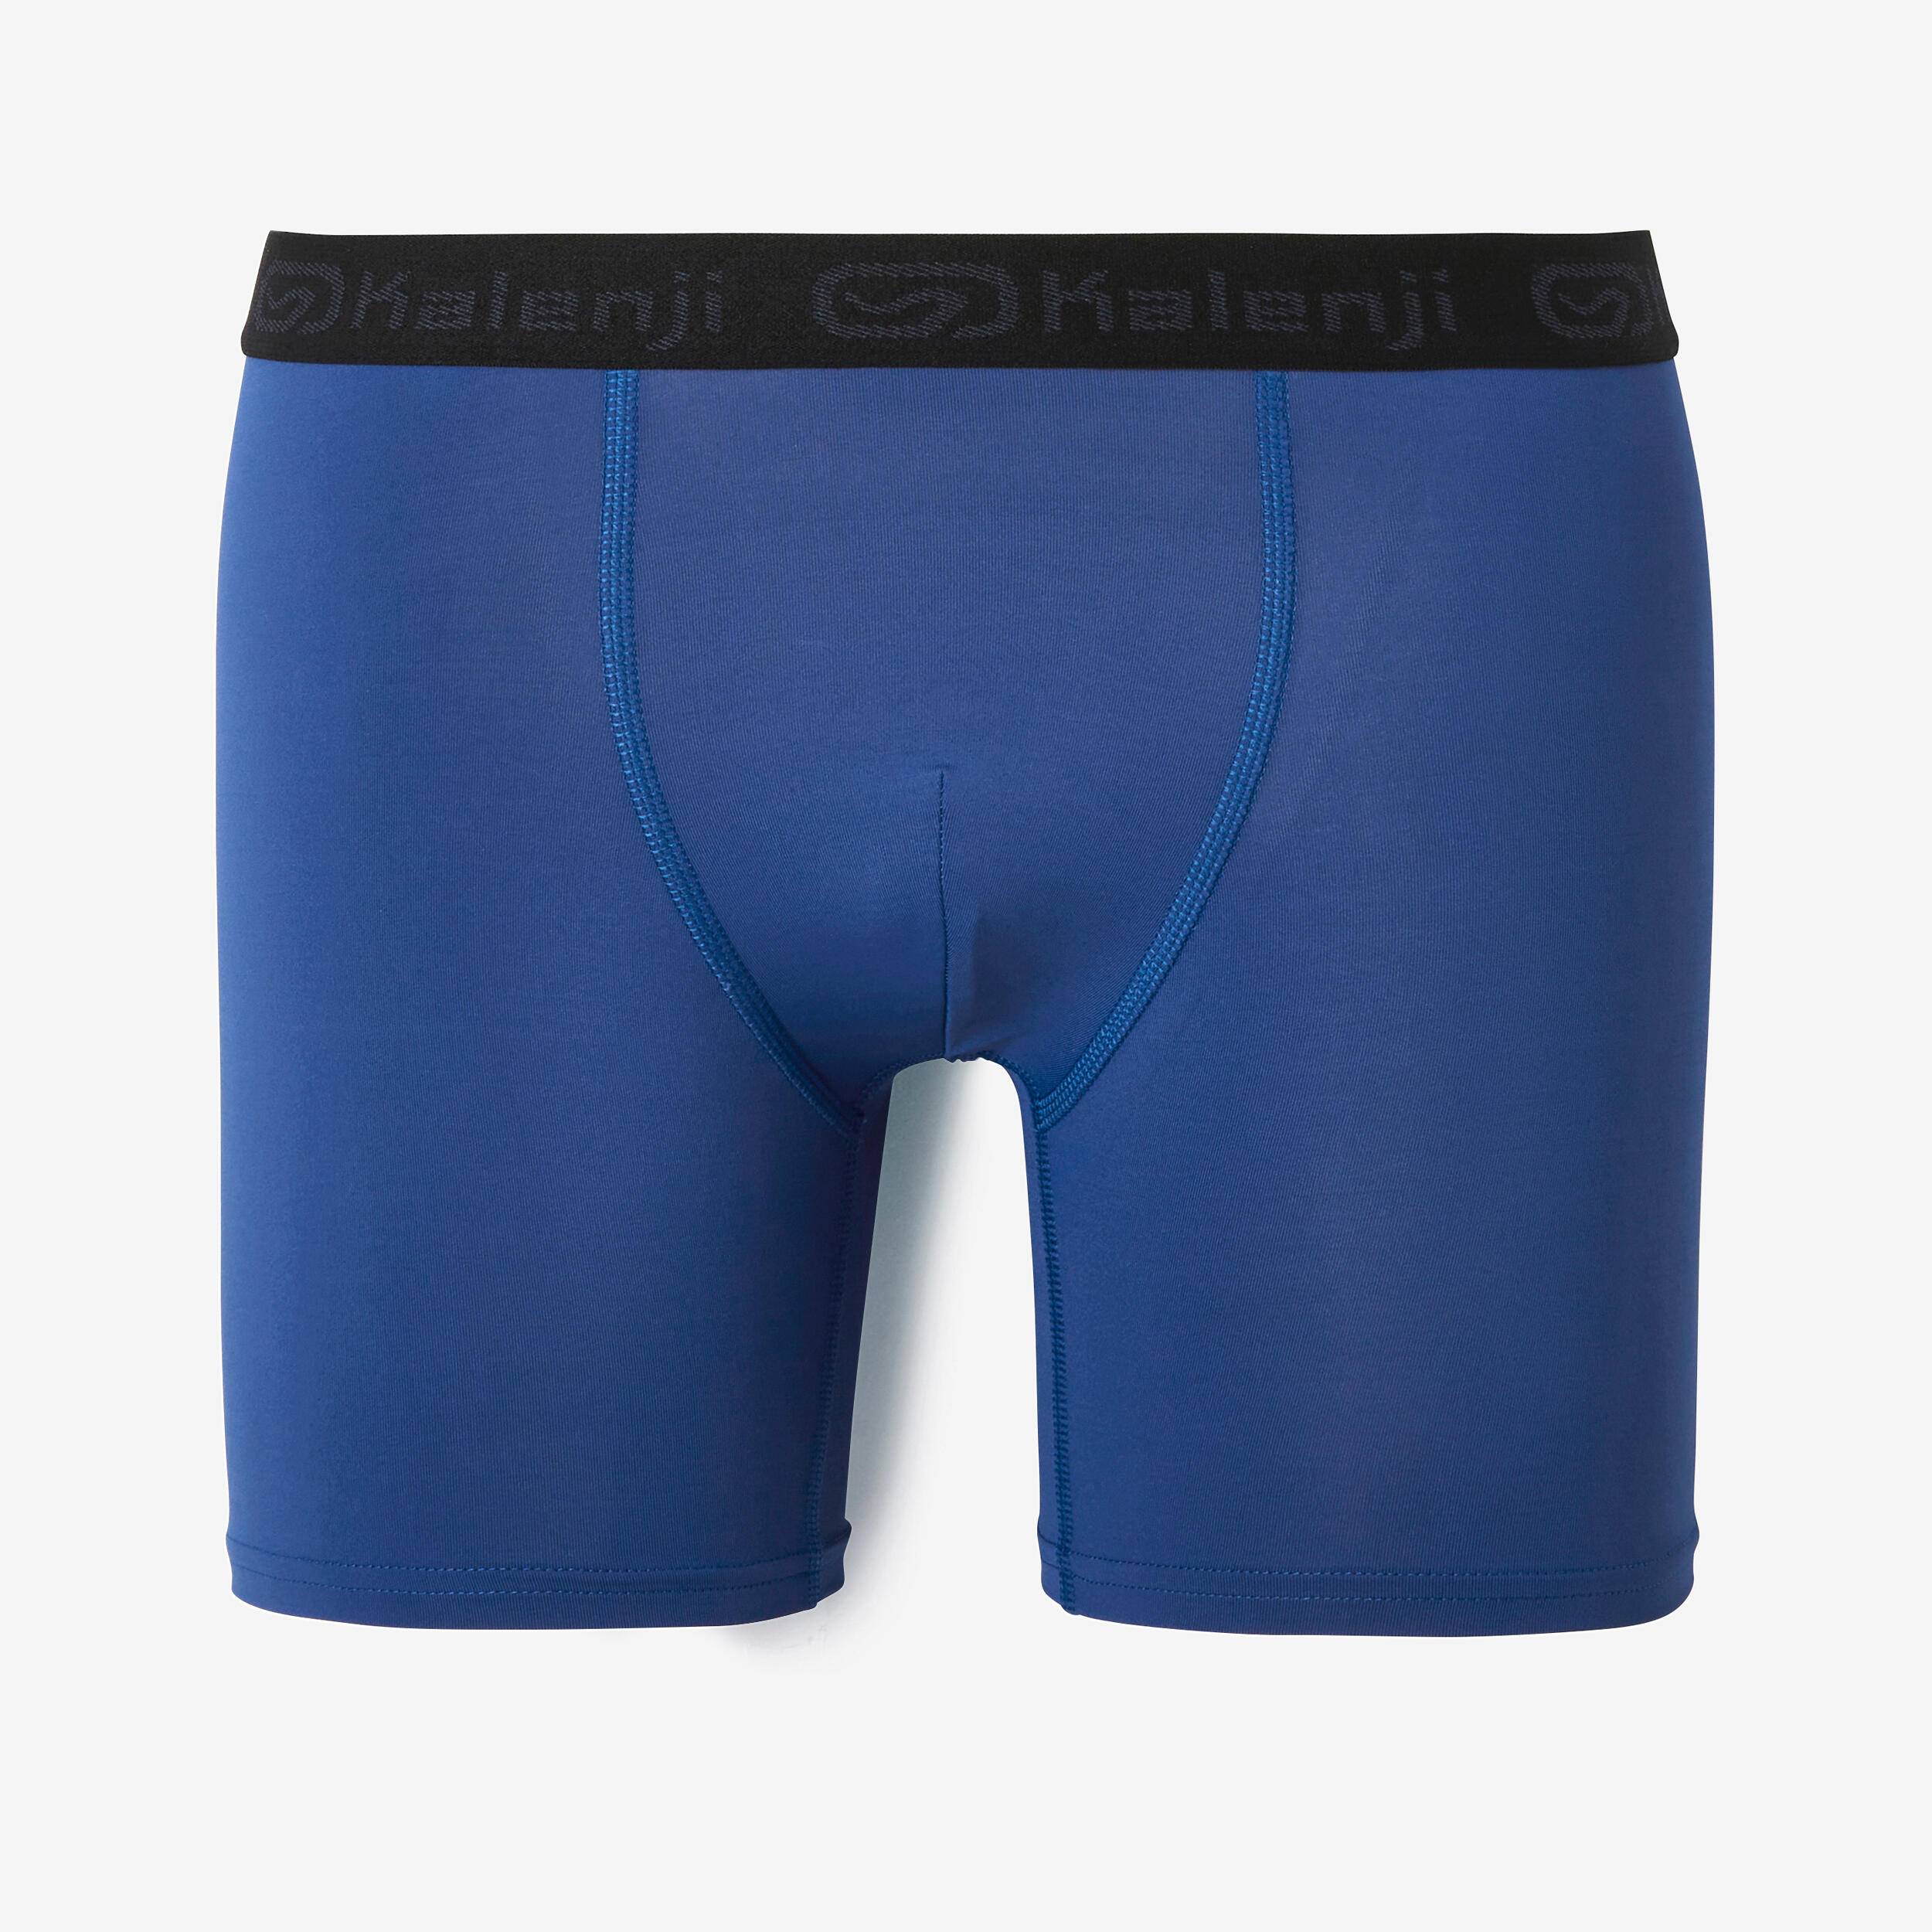 Blue Dice Set Breathable Underwear Set With Print Graphic Shorts And Boxer  Briefs For Men From Baoqinni, $14.28